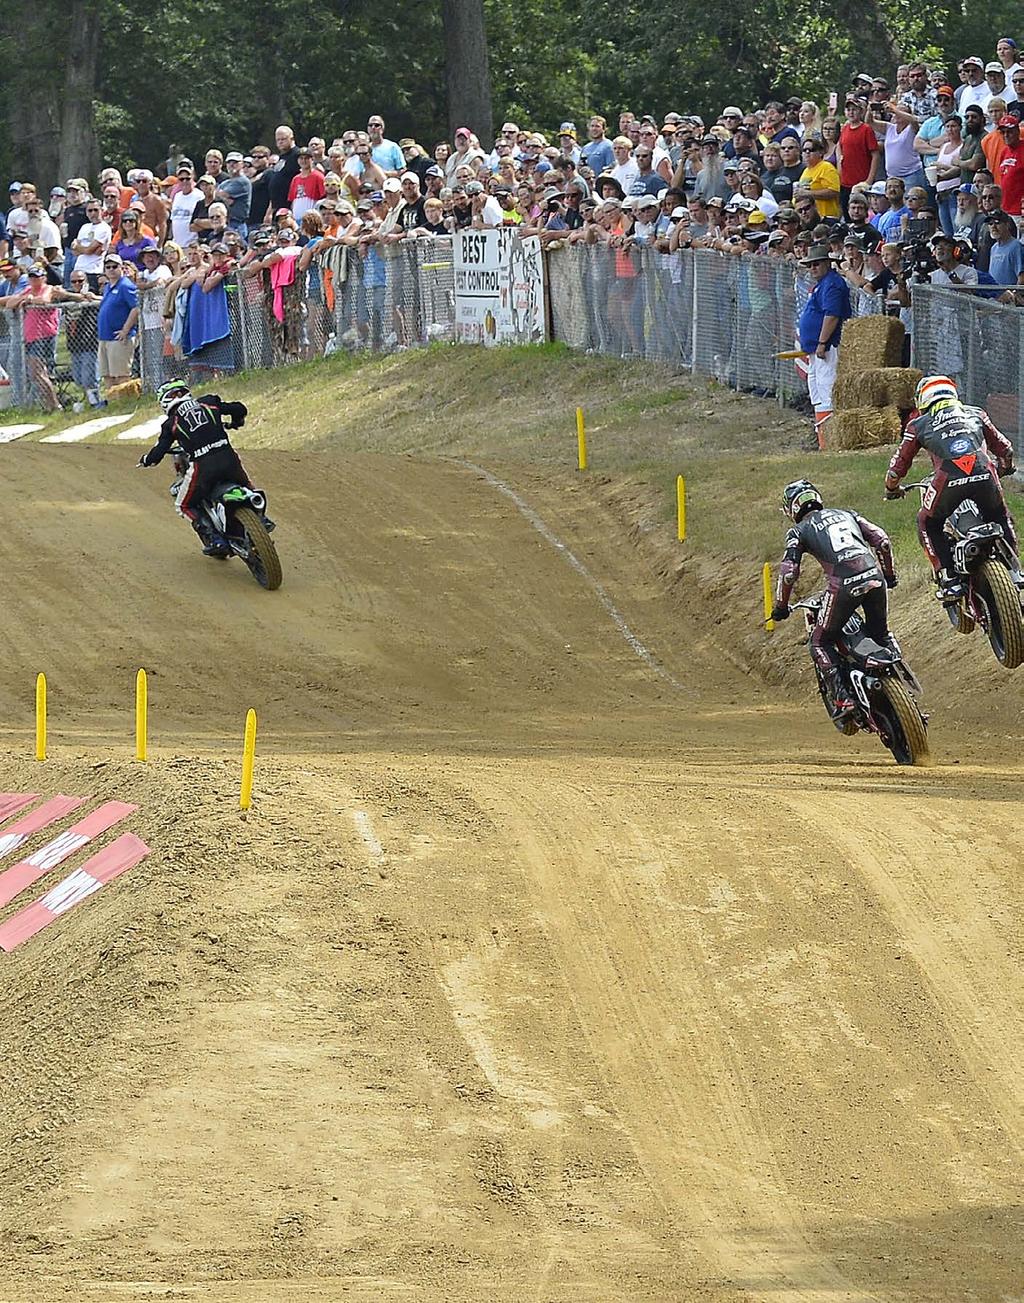 ROUND 14 / AUGUST 13, 2017 PEORIA RACE PARK / PEORIA, ILLINOIS FLAT TRACK AMERICAN FLAT TRACK CHAMPIONSHIP P88 Henry Wiles leads the way on the modified Peoria TT track.